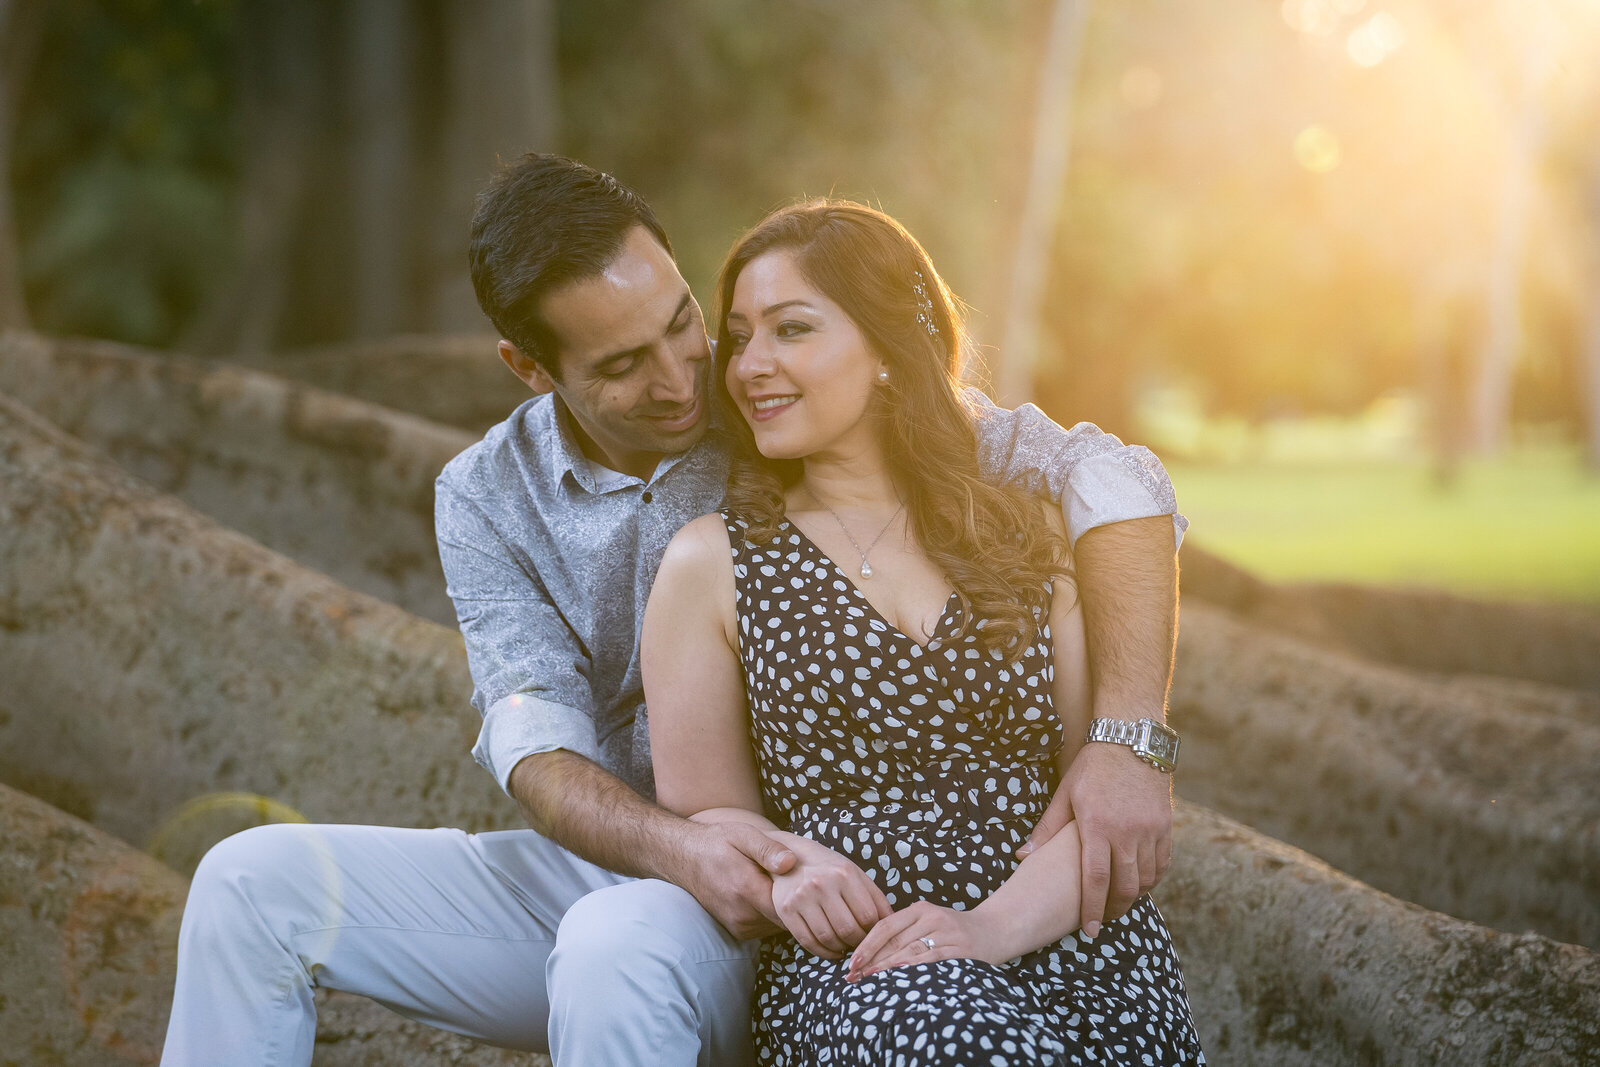 Adelaide_DreamTeamImaging_Engagement _Pre_Wedding_Photography_09